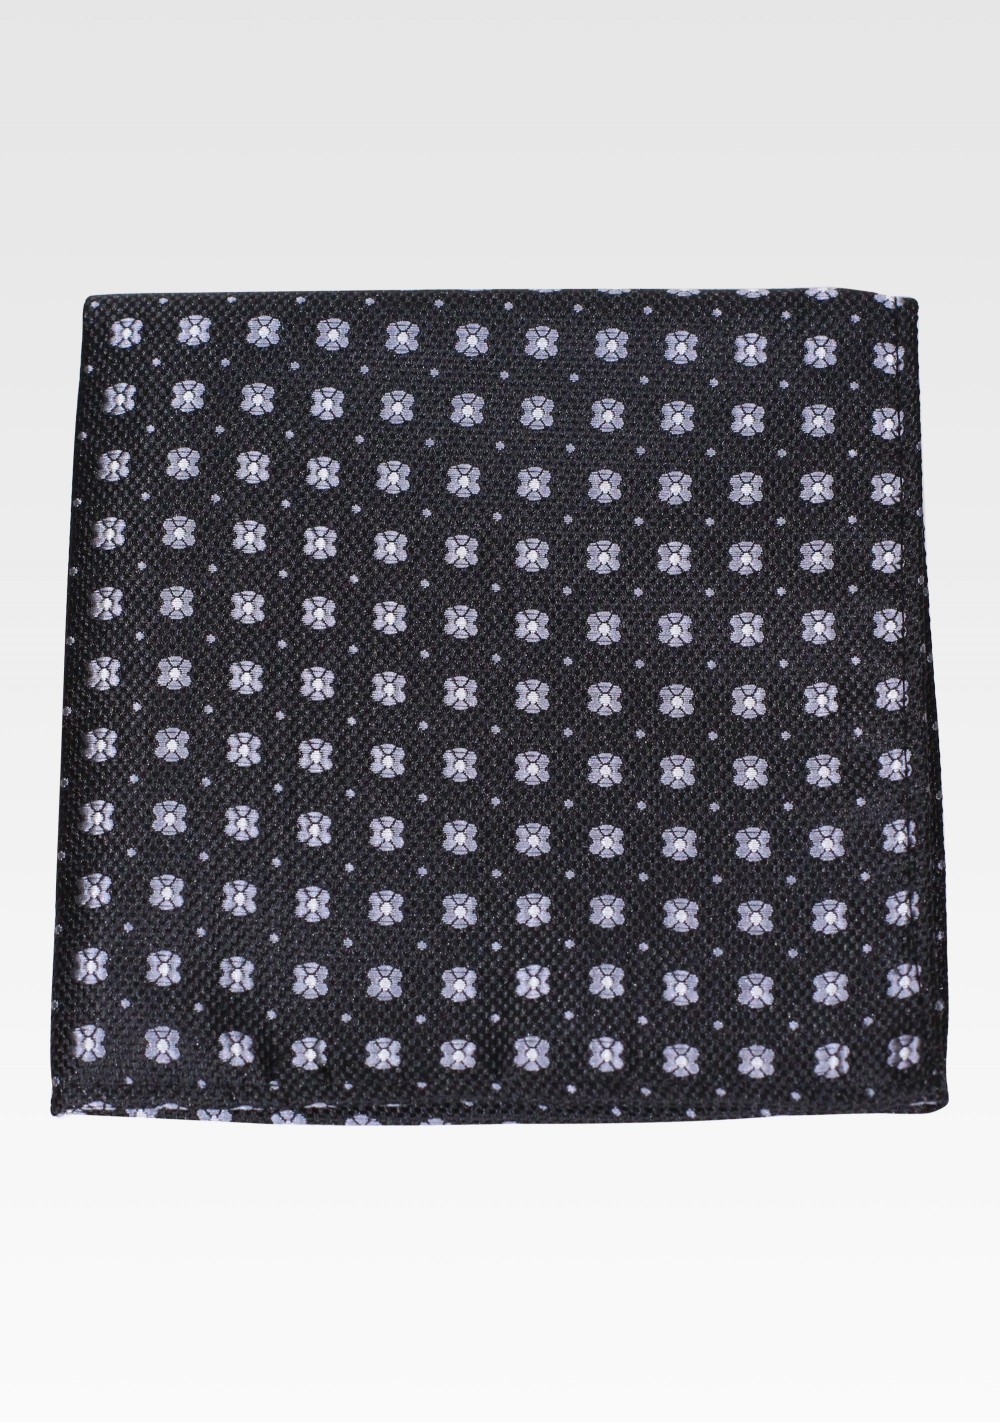 Black Pocket Square with Gray Floral Weave